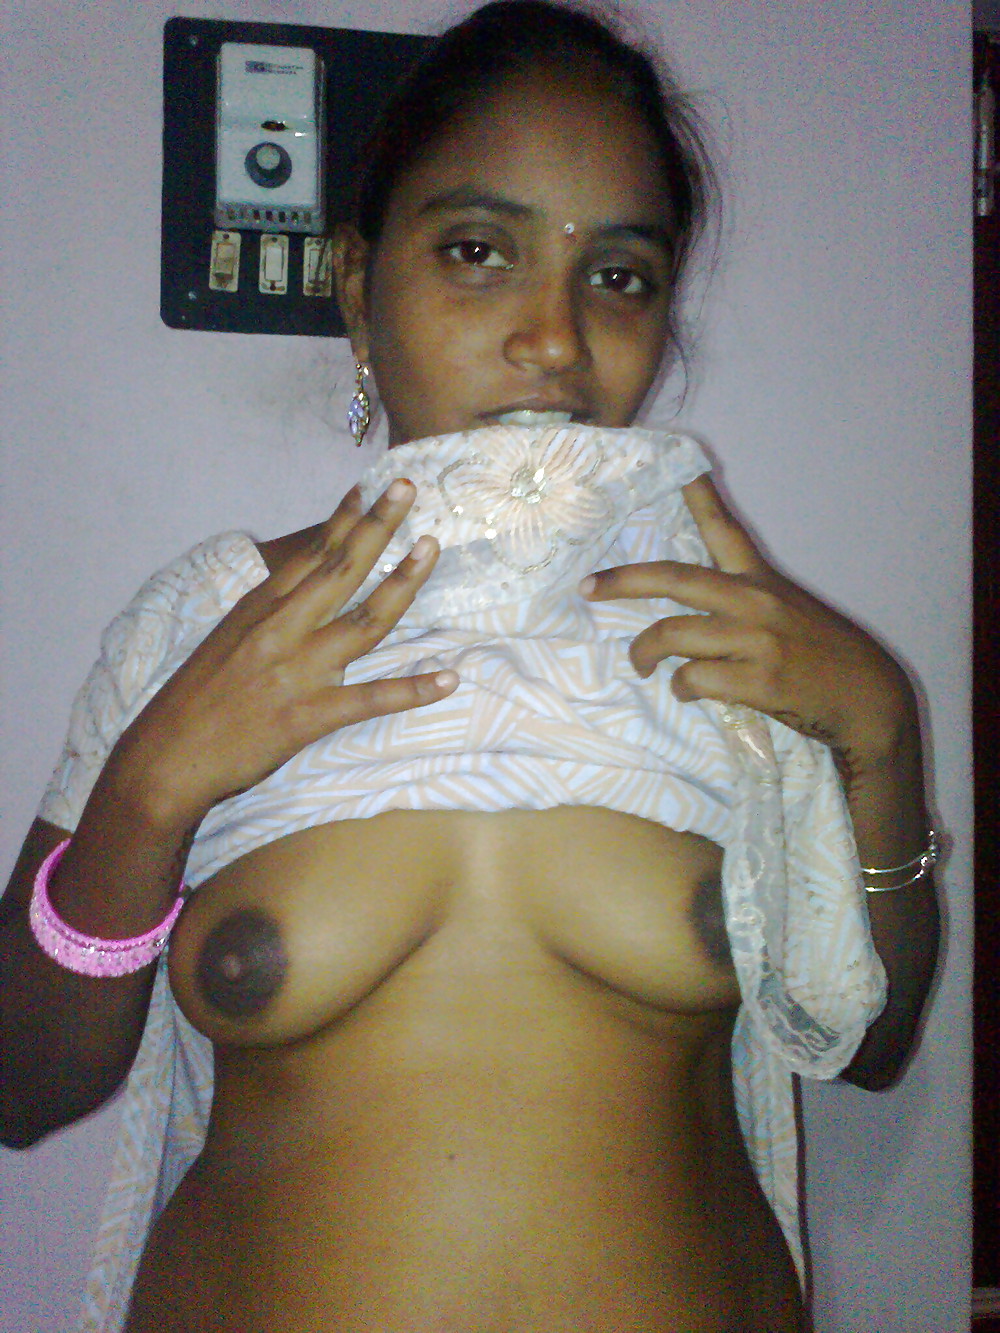 Sexy Indian chicks . 3 - coolbudy #7284153